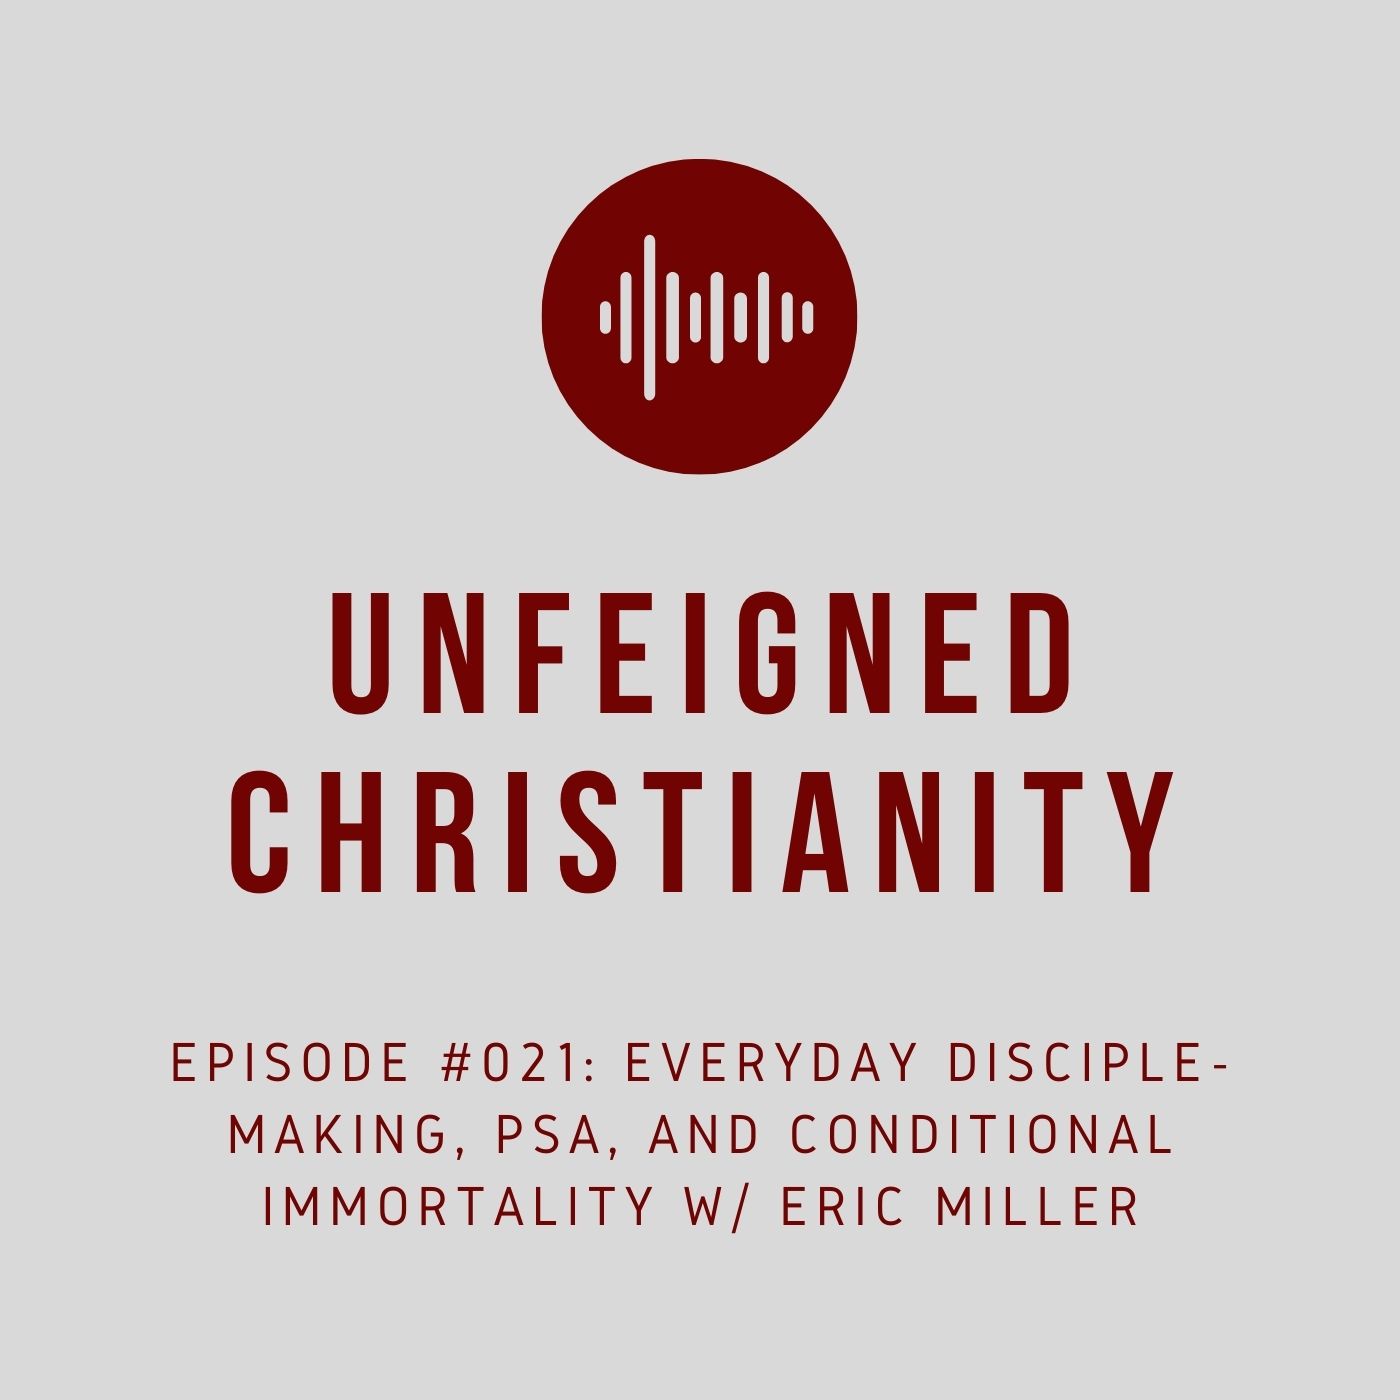 #021 - Everyday Disciple-Making, PSA, and Conditional Immortality w/ Eric Miller